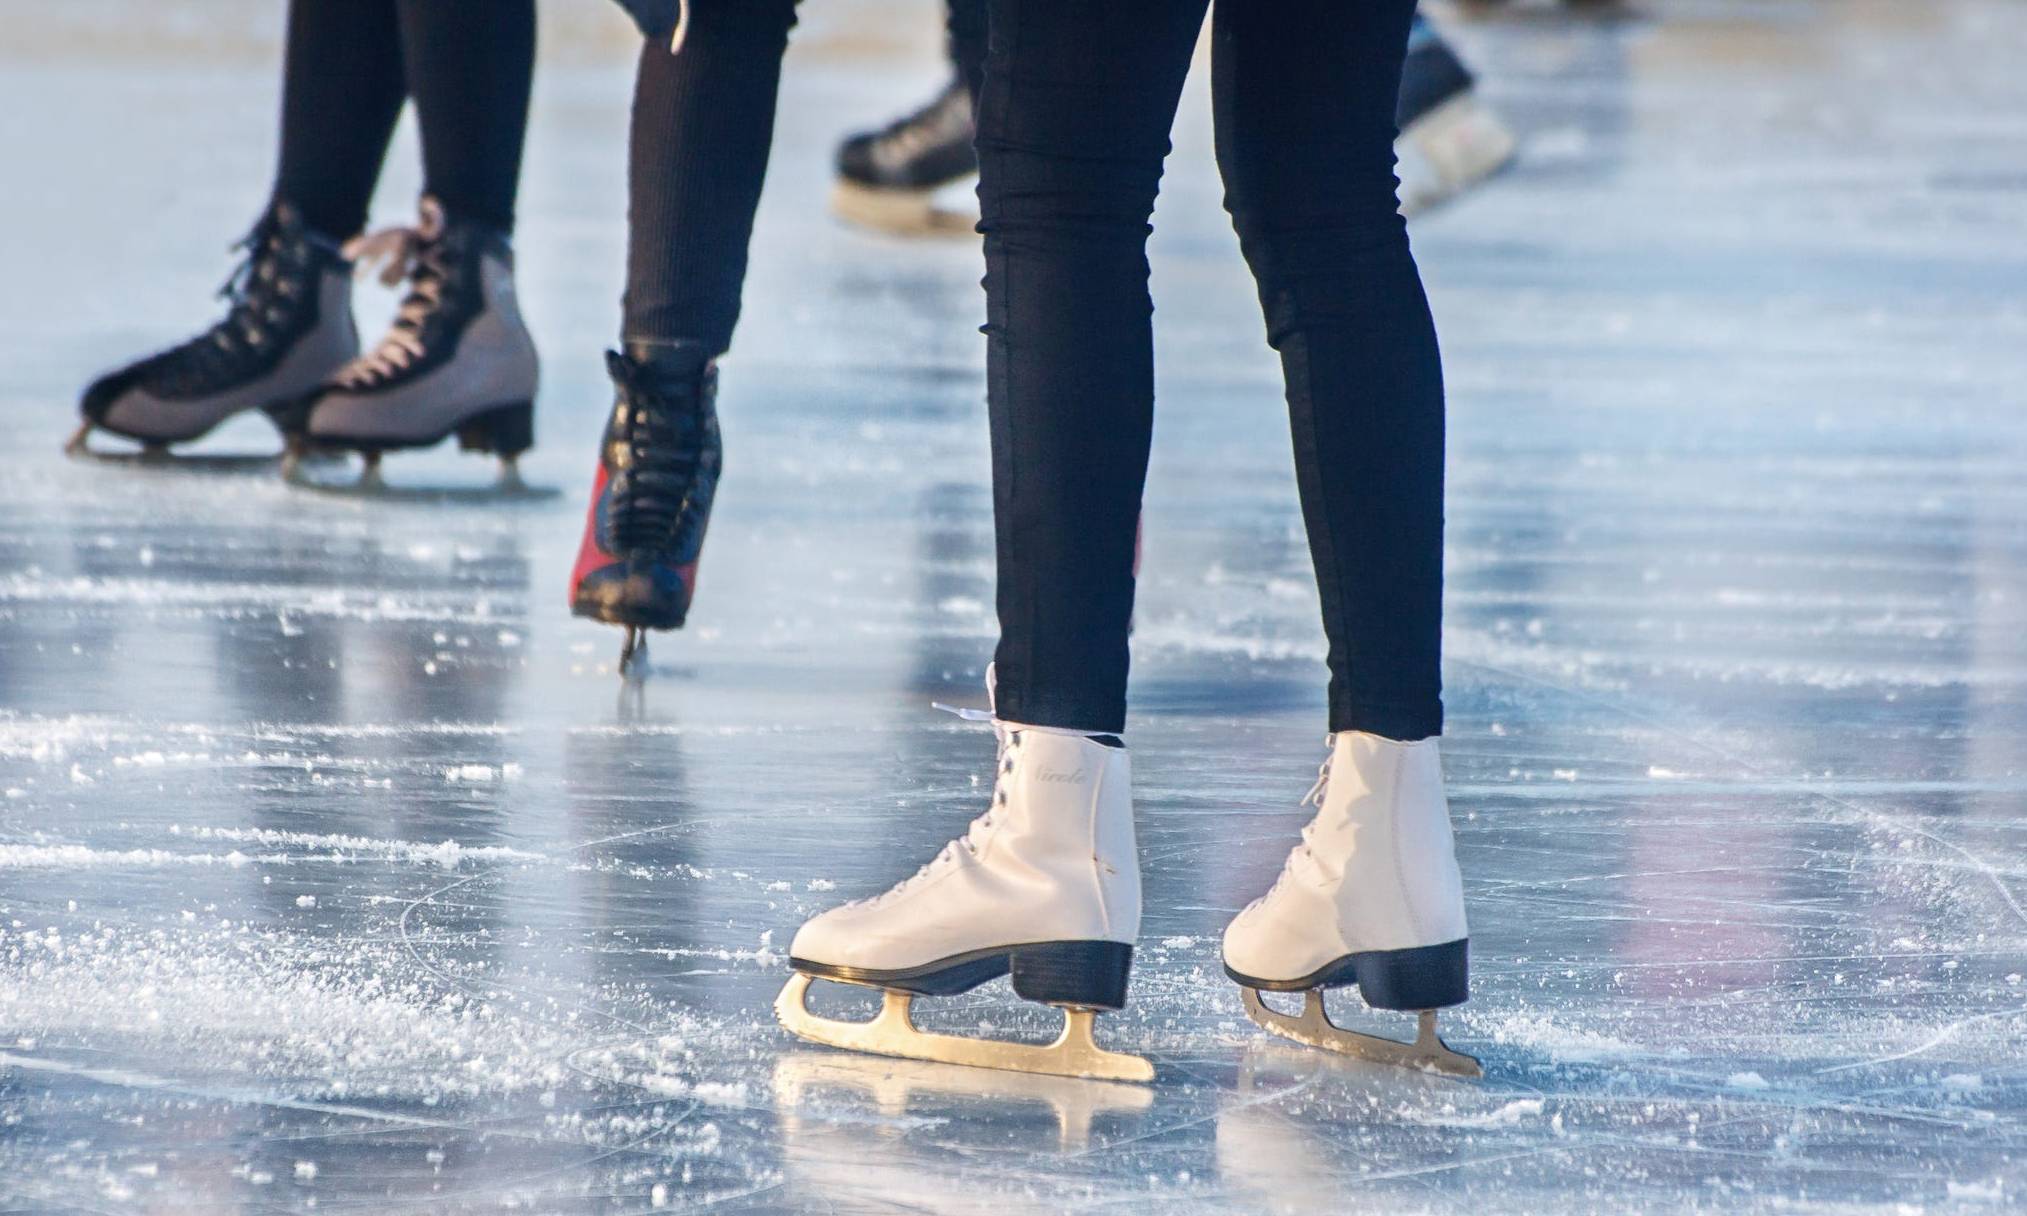 Ice skating season is just starting out